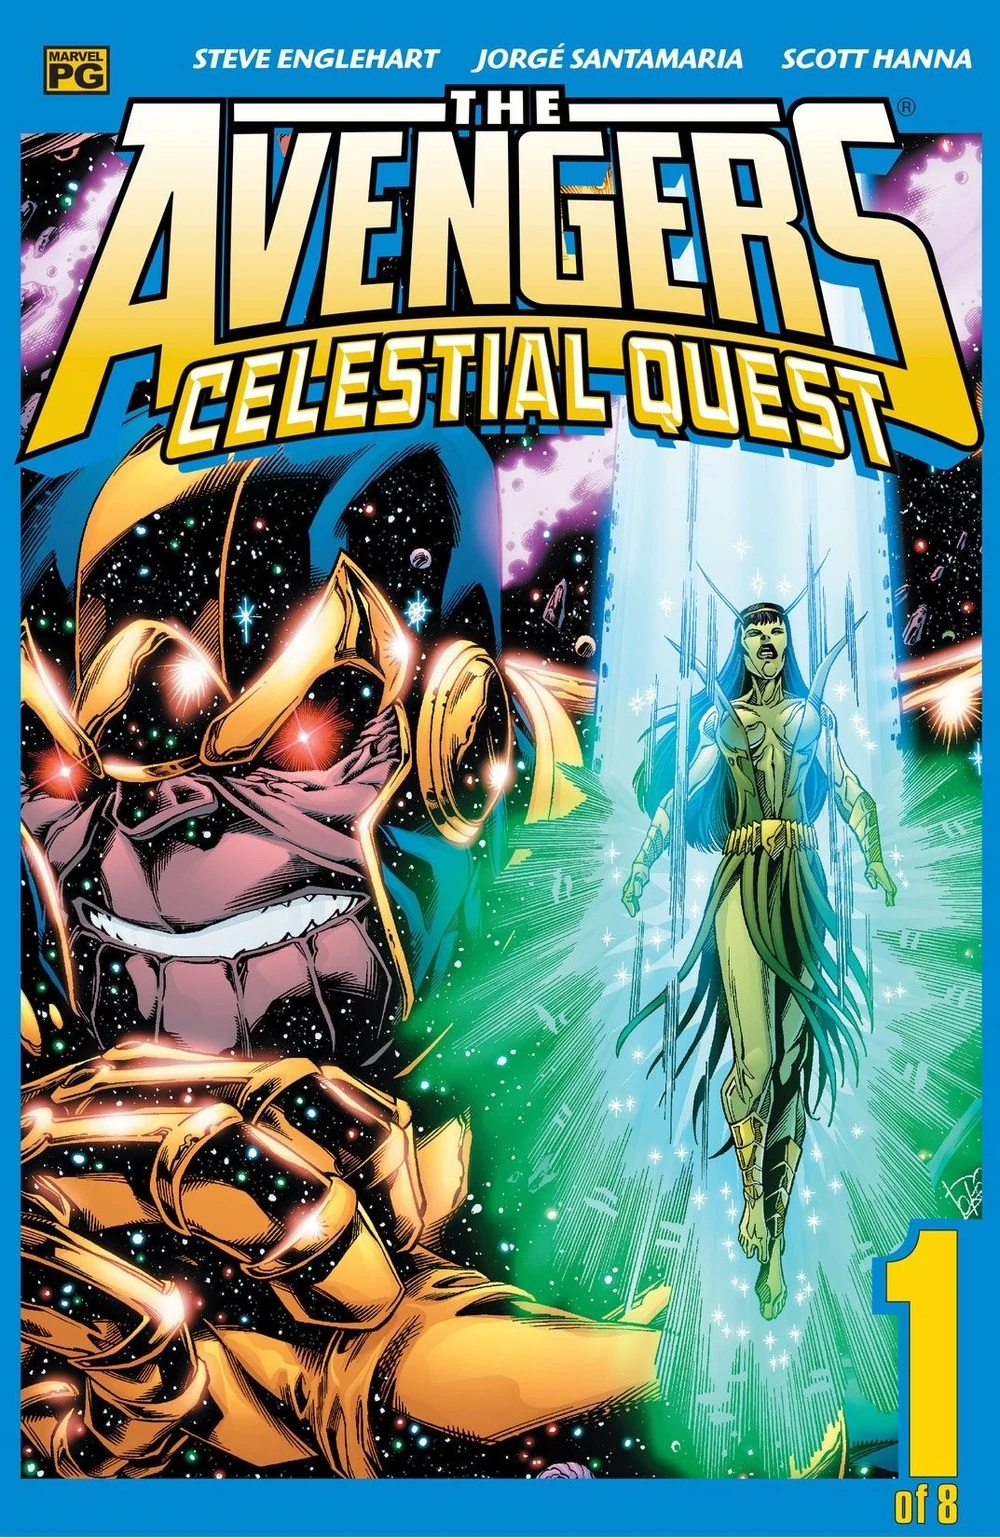 The Avengers: Celestial Quest Limited Series Bundle Issues 1-8